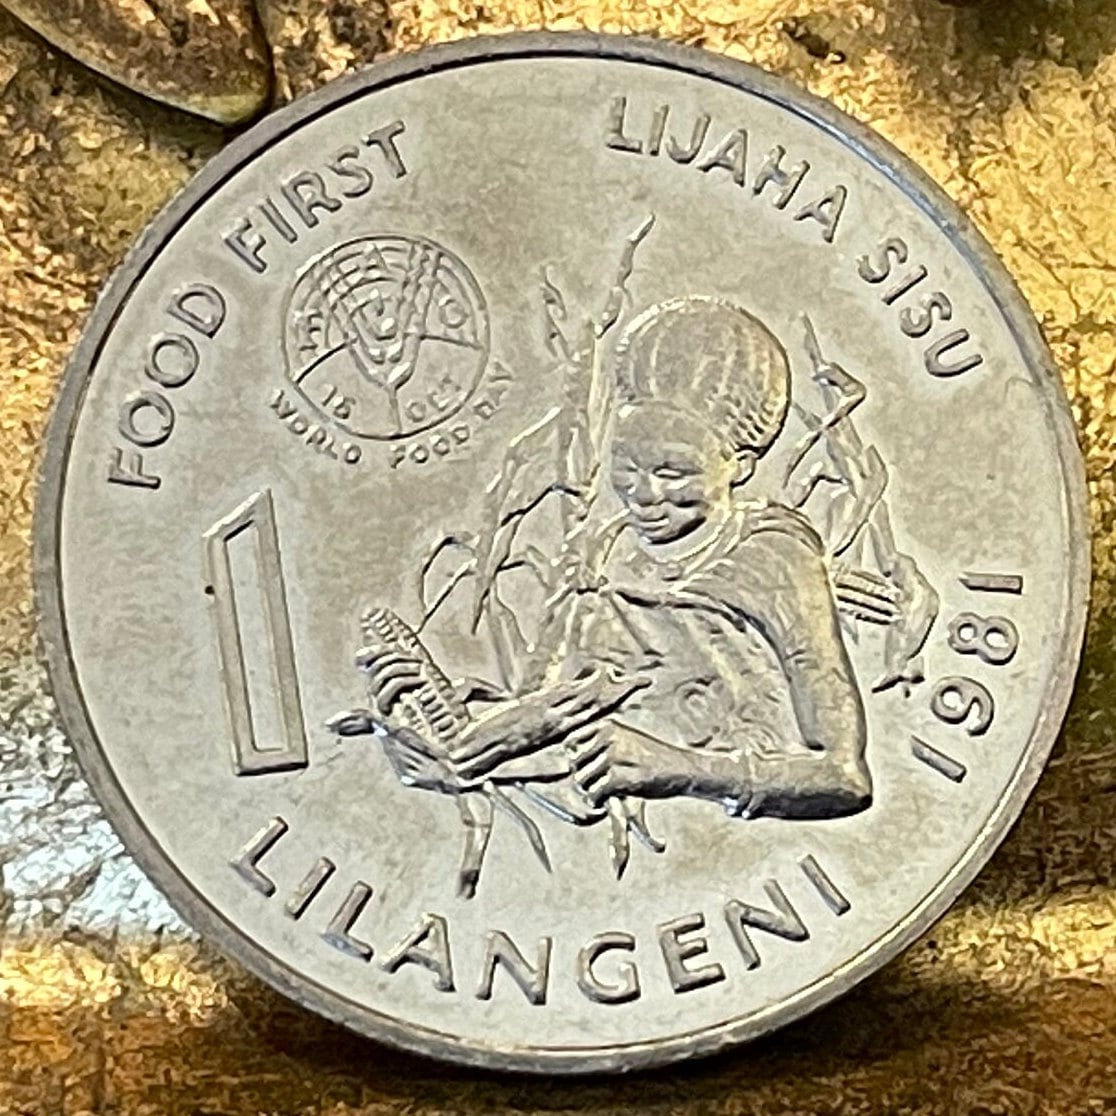 Woman with Beehive Sicolo Hairdo, Husking Corn & King Sobhuza 1 Lilangeni Swaziland Authentic Coin Money for Jewelry (1981) (Eswatini) Maize